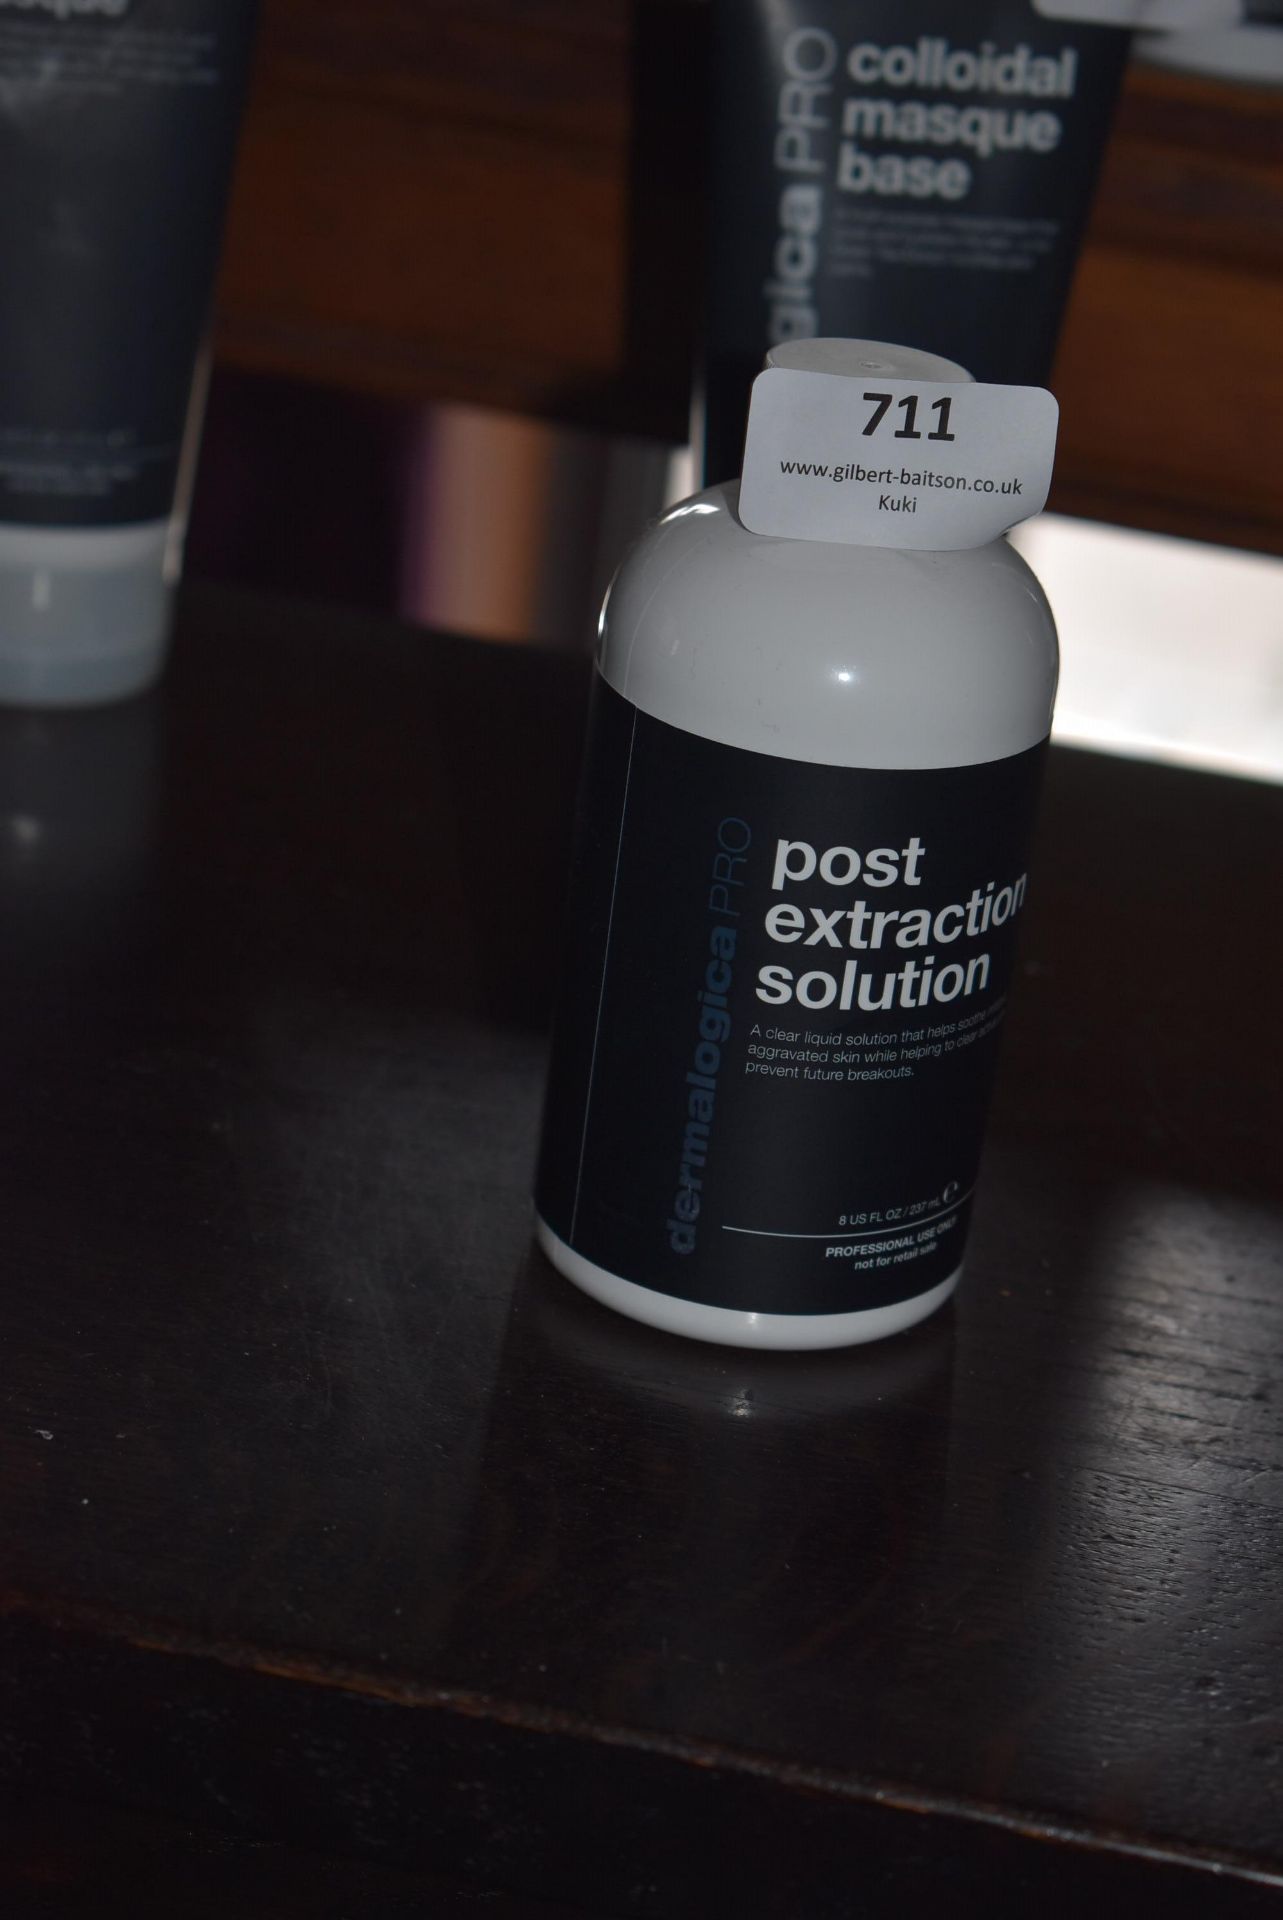 *1x 237ml of Dermalogica Pro Post Extraction Solution